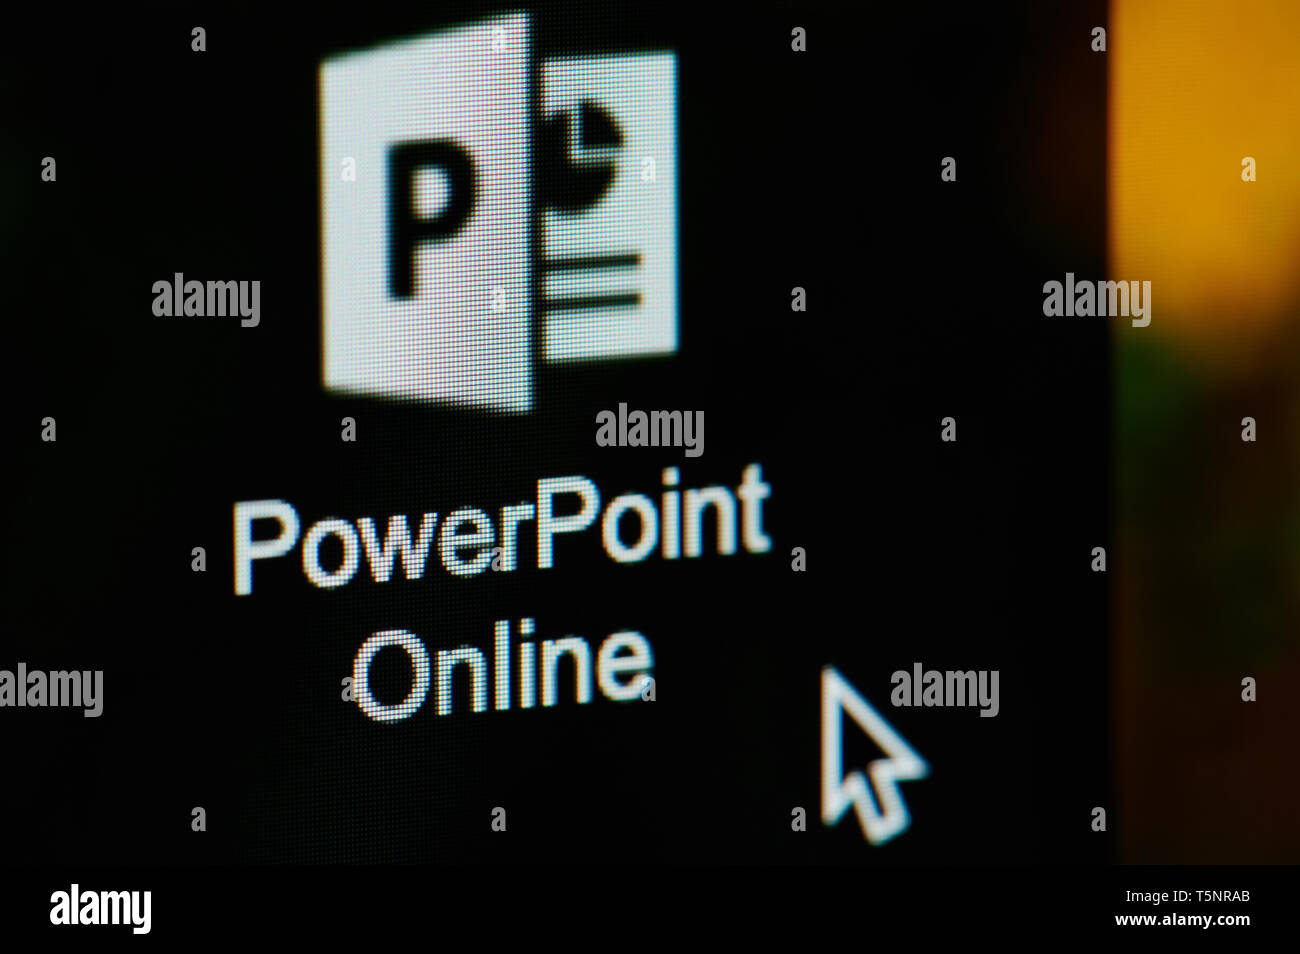 New york, USA - april 22, 2019: Starting Microsoft Powerpoint online on laptop screen close up Stock Photo